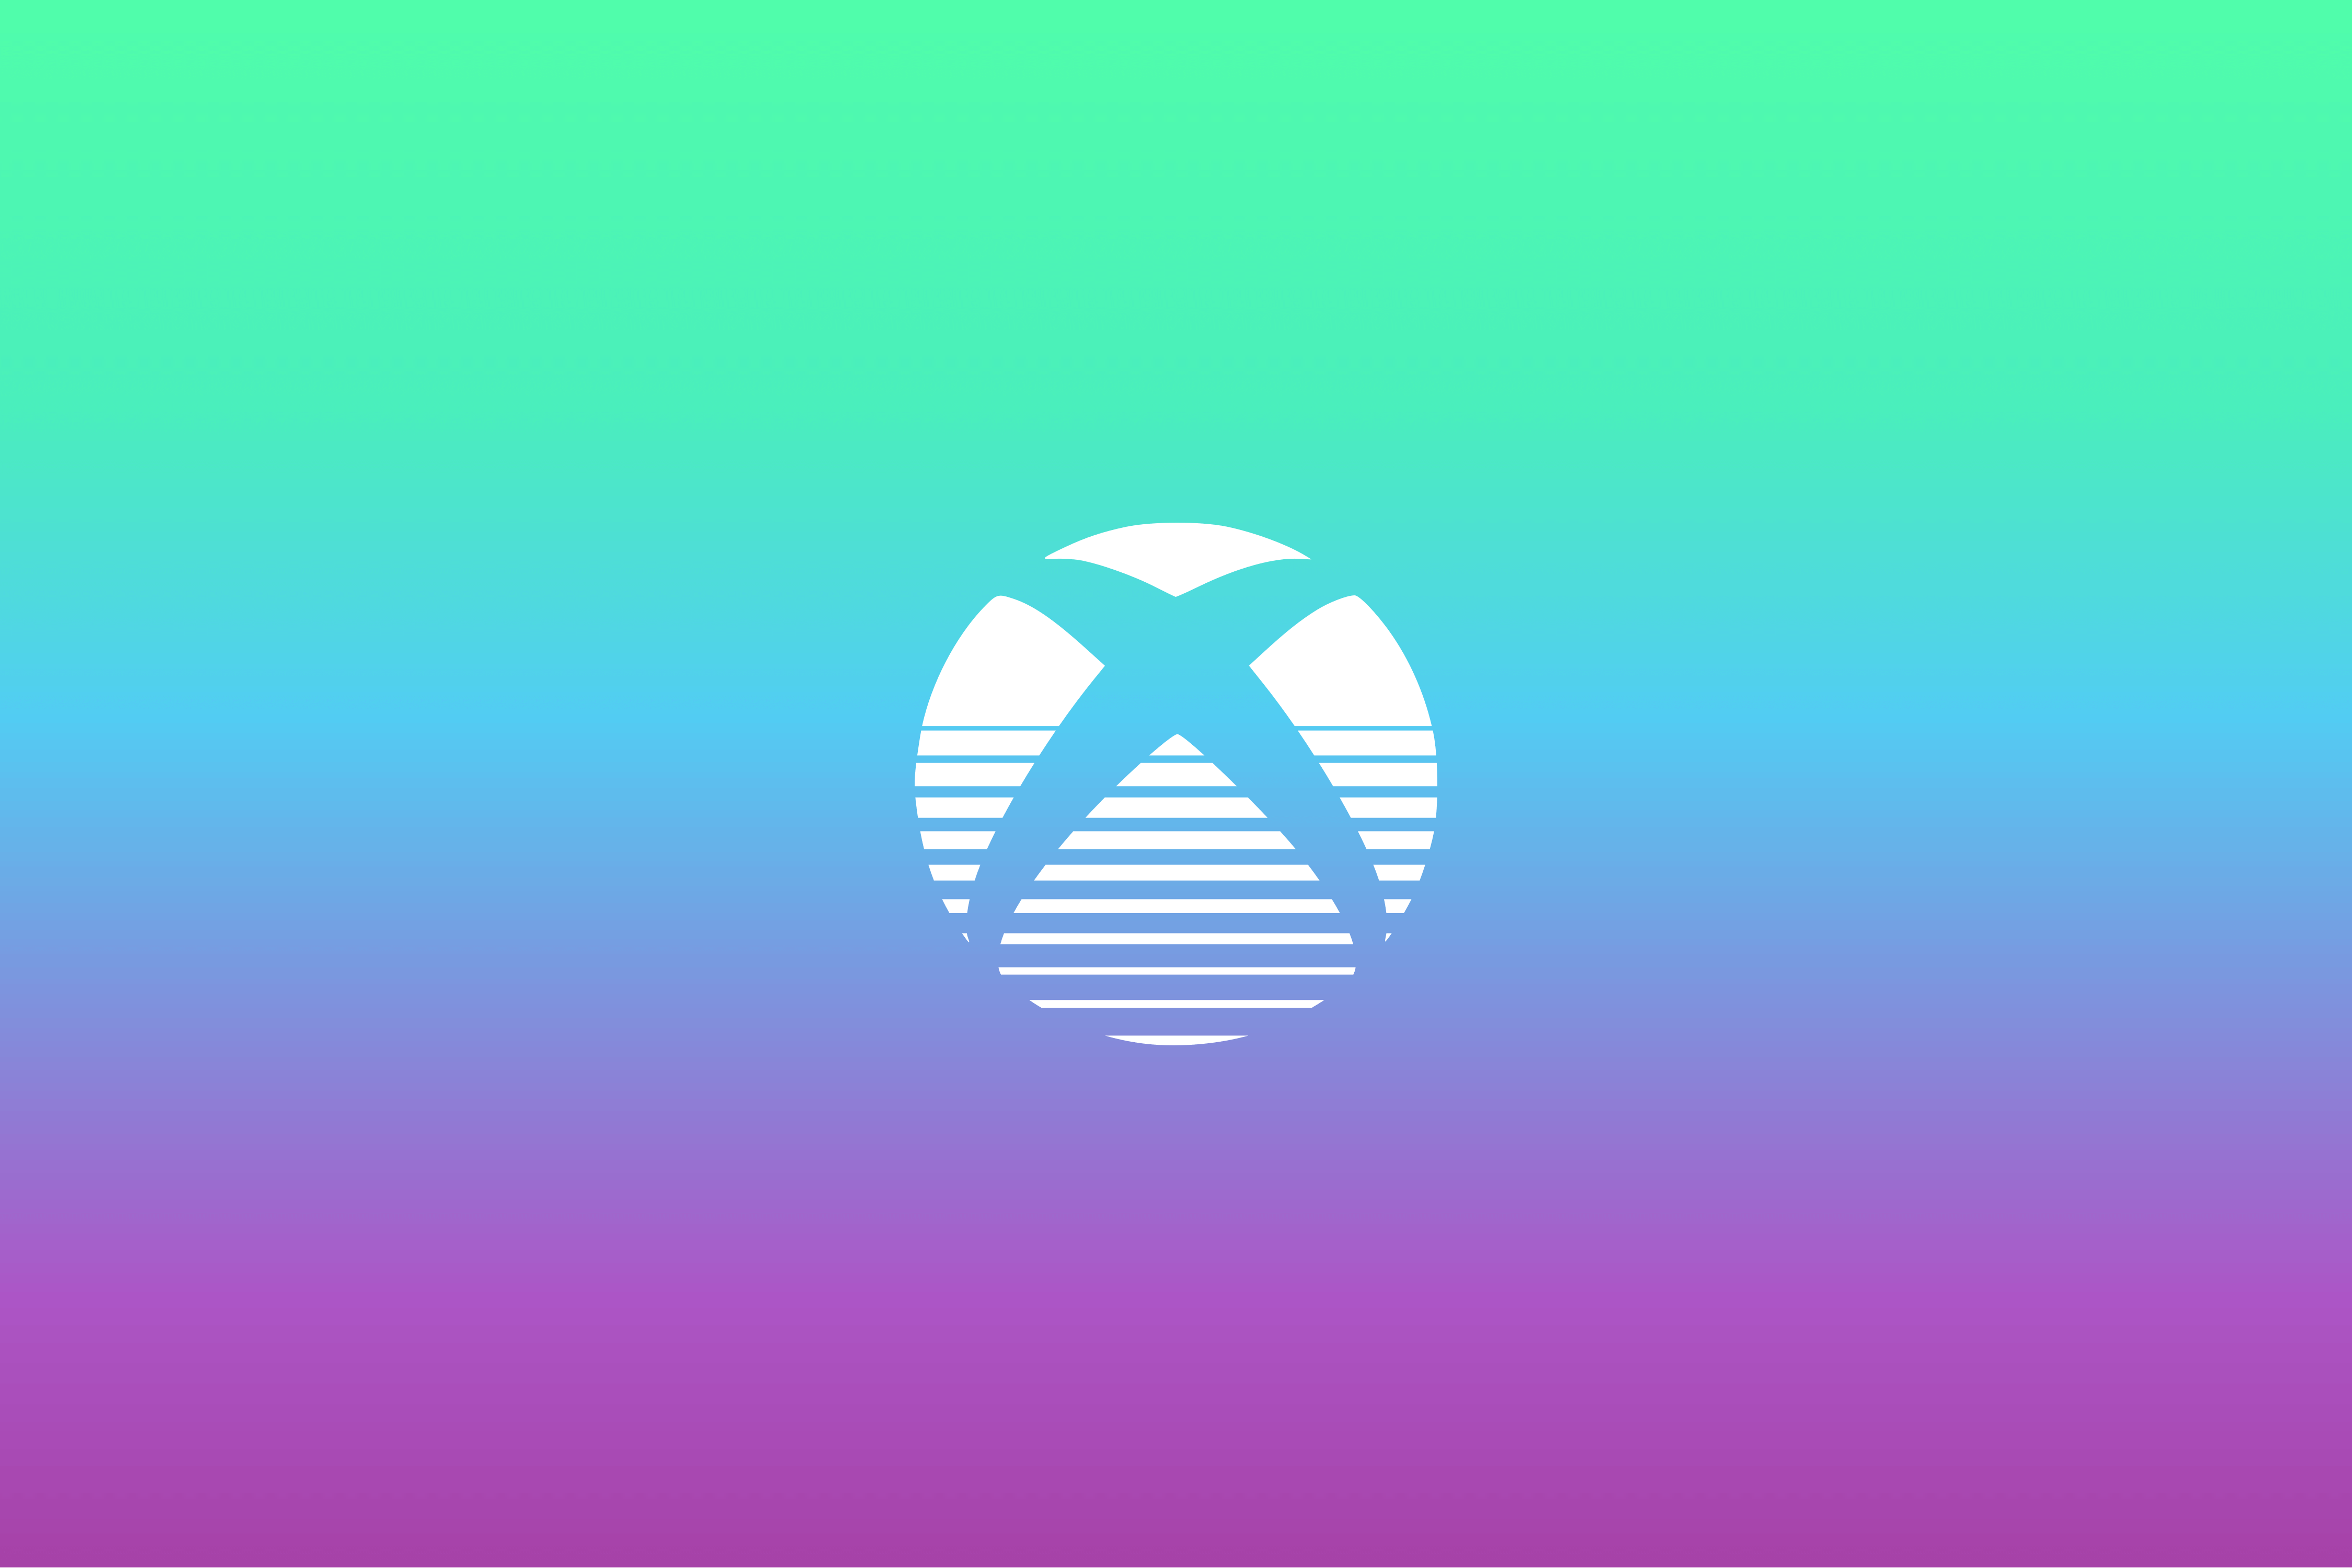 General 4500x3000 Xbox Microsoft logo white lines retro style colorful consoles cyan turquoise video games